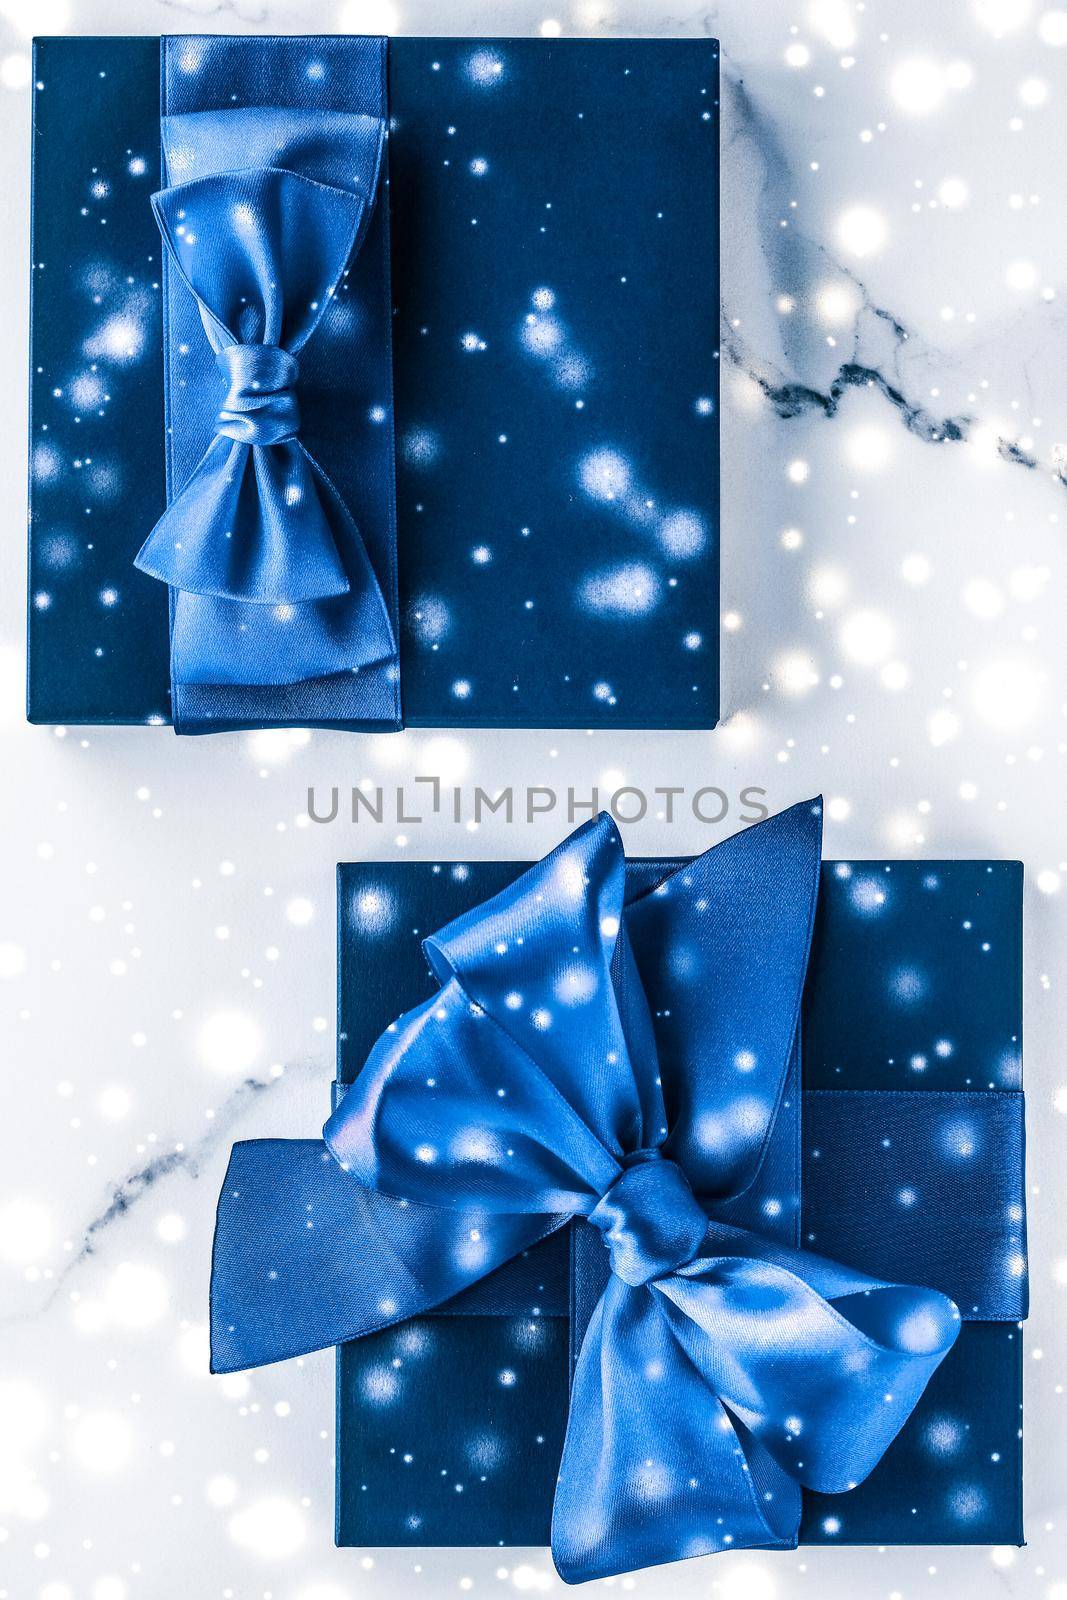 Branding, glamour and cold season concept - Winter holiday gift box with blue silk bow, snow glitter on marble background as Christmas and New Years presents for luxury beauty brand, flatlay design